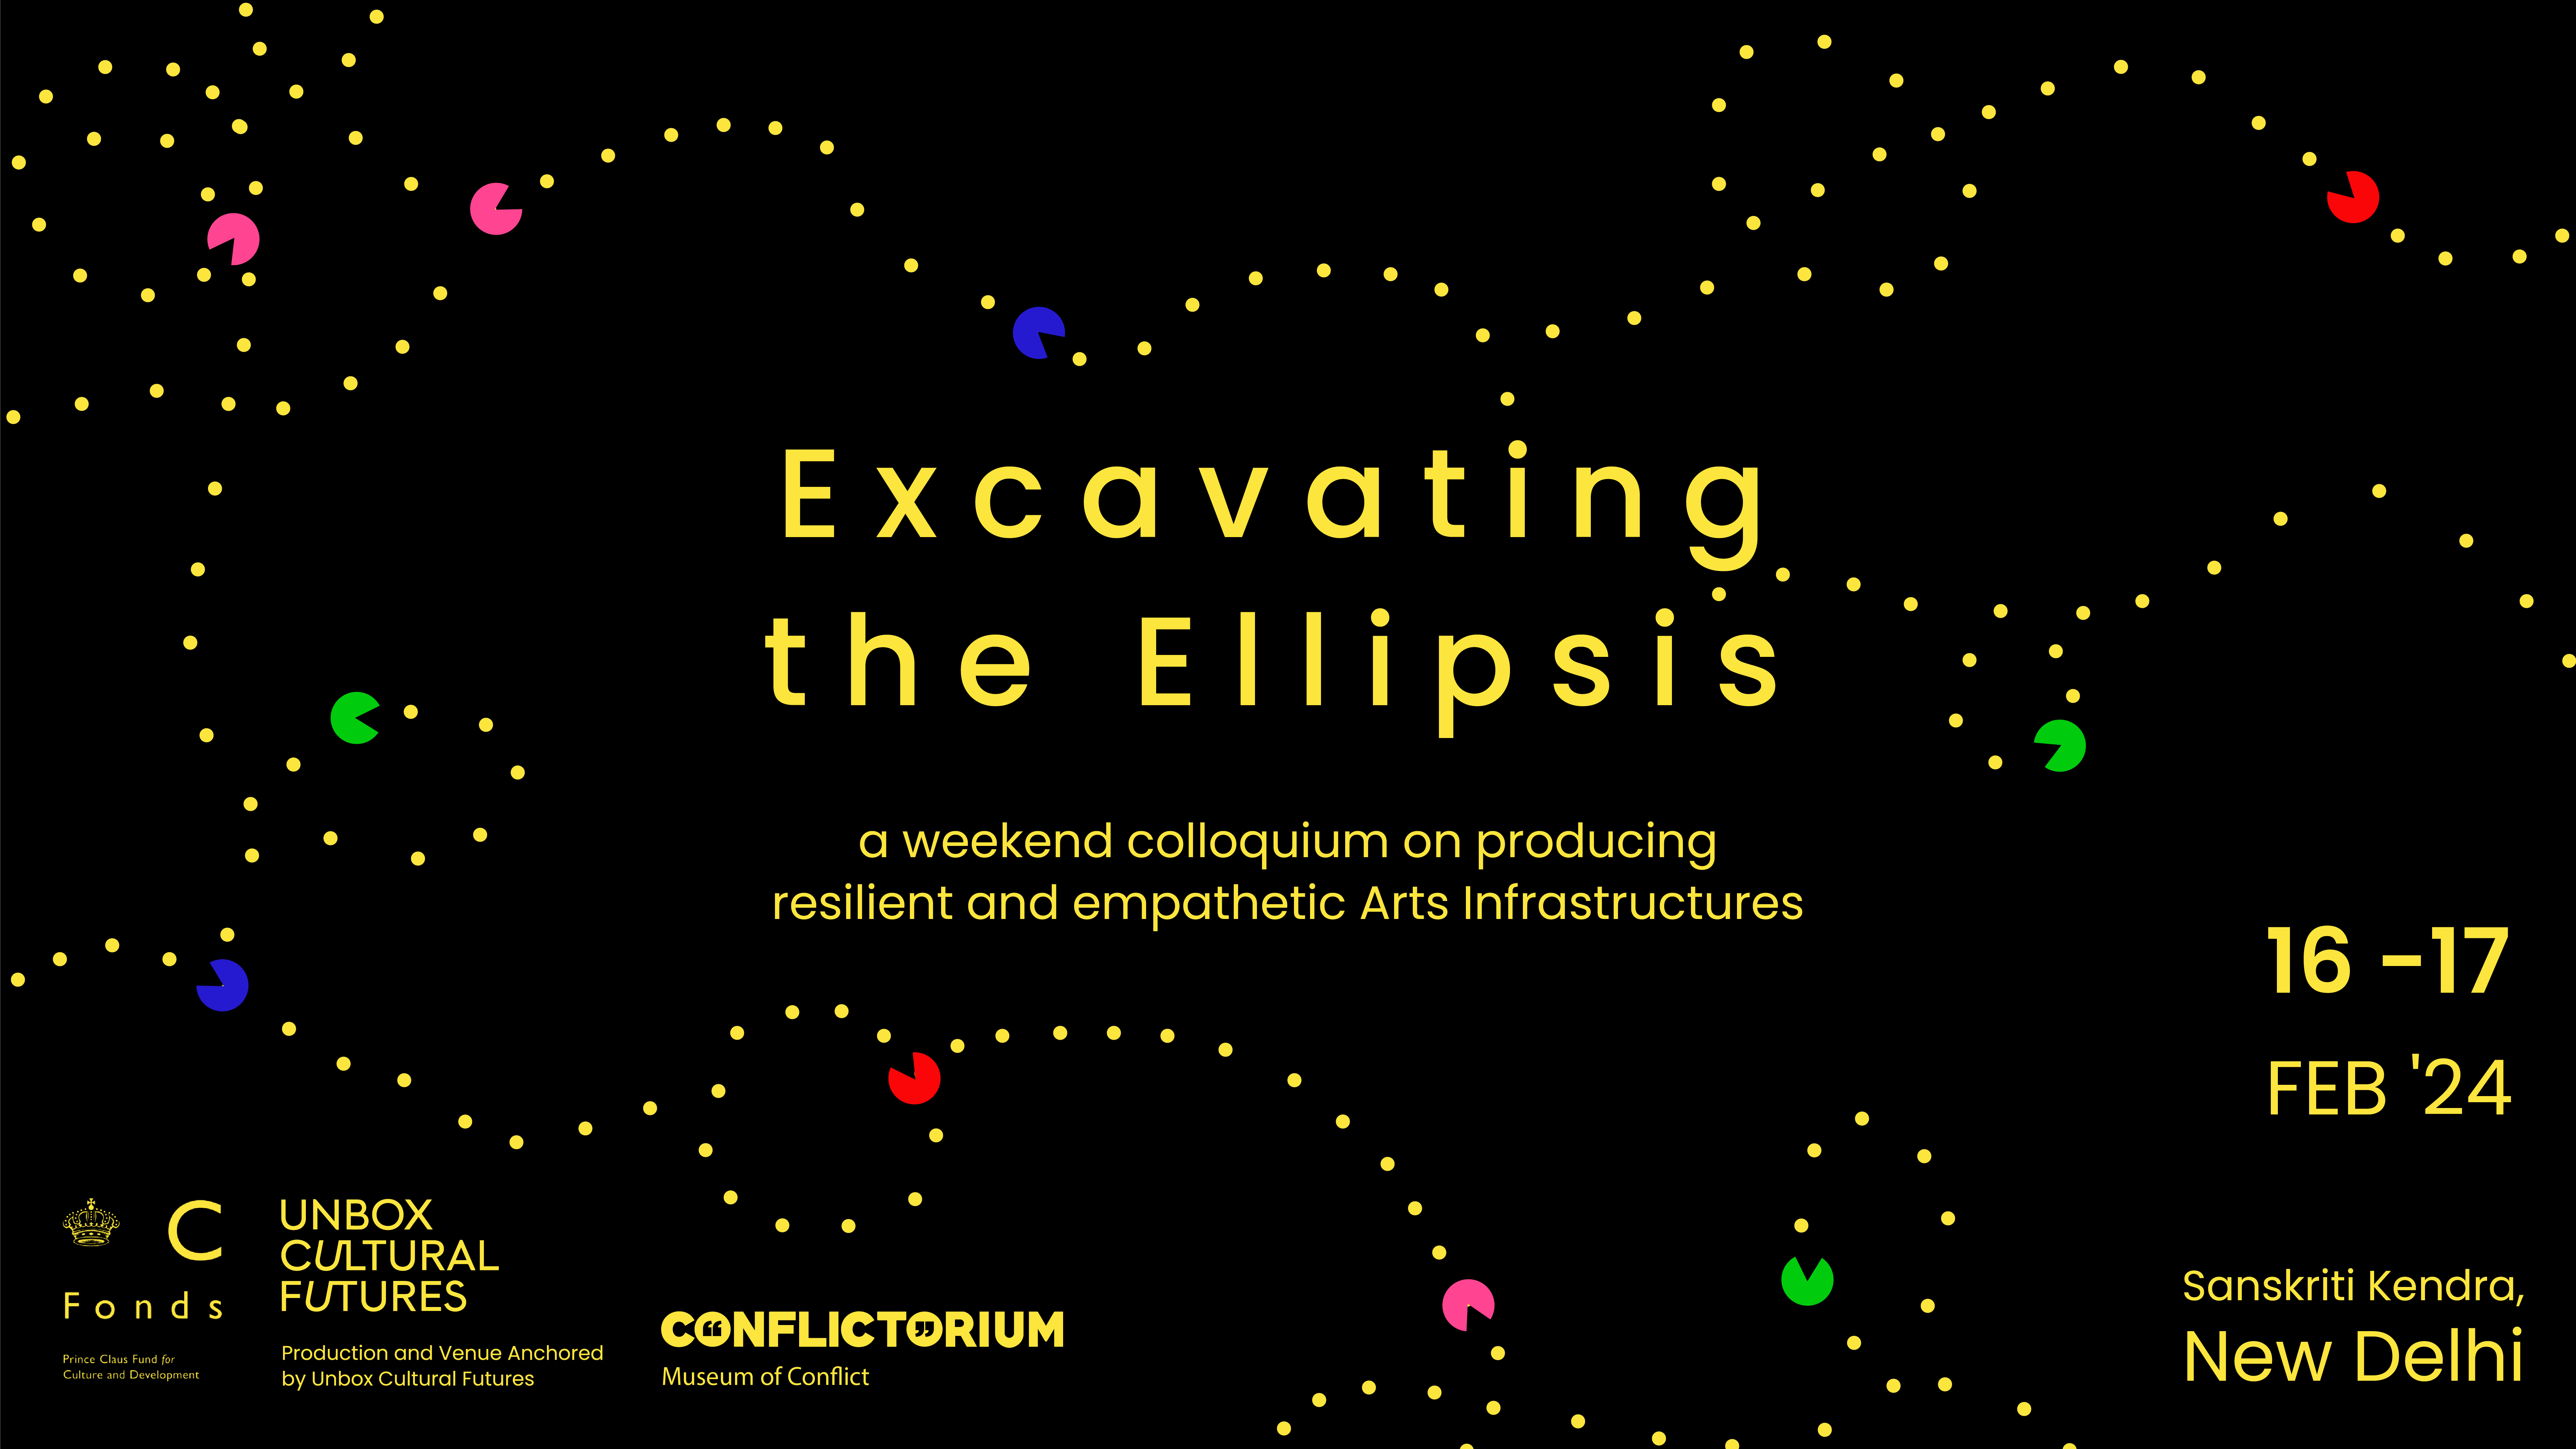 Excavating the Ellipsis poster G 02